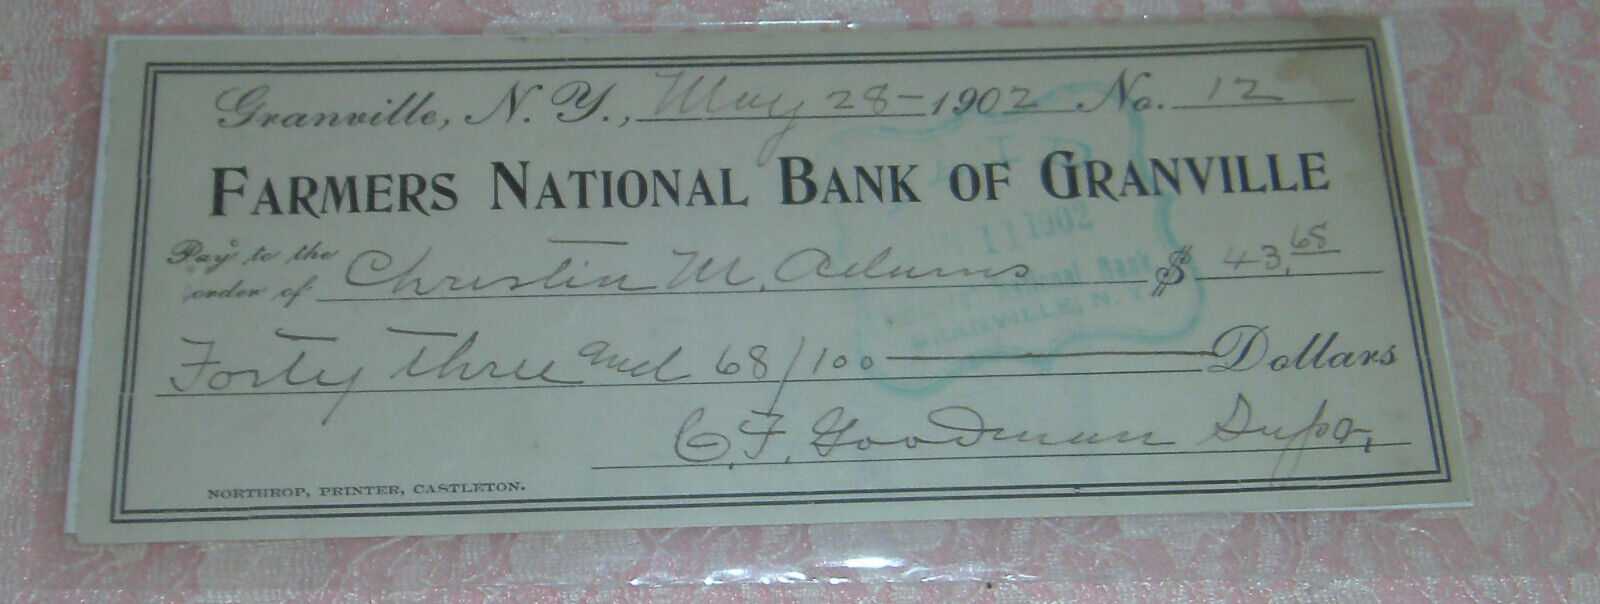 1902 Antique Check Farmers National Bank Granville, NY